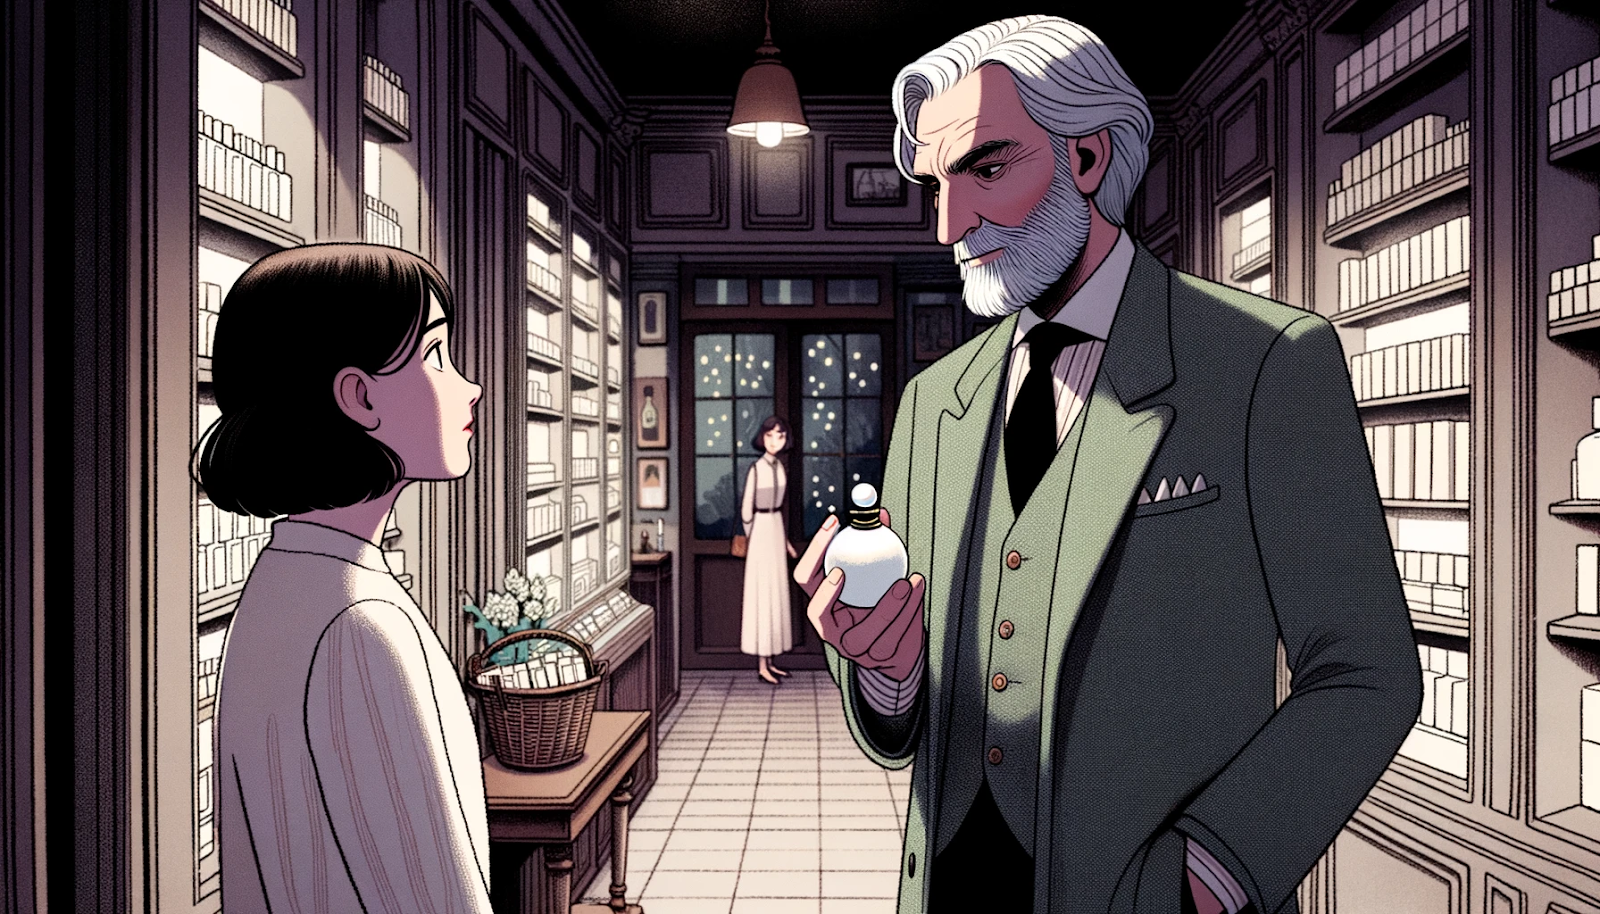 Illustration of Laurent, a tall man with silvering temples, standing at the entrance of the perfumery. He is looking towards Claire, who is still holding the pearly white bottle. Amelie watches him with a mix of recognition and curiosity. The shop is dimly lit, creating a mysterious atmosphere.